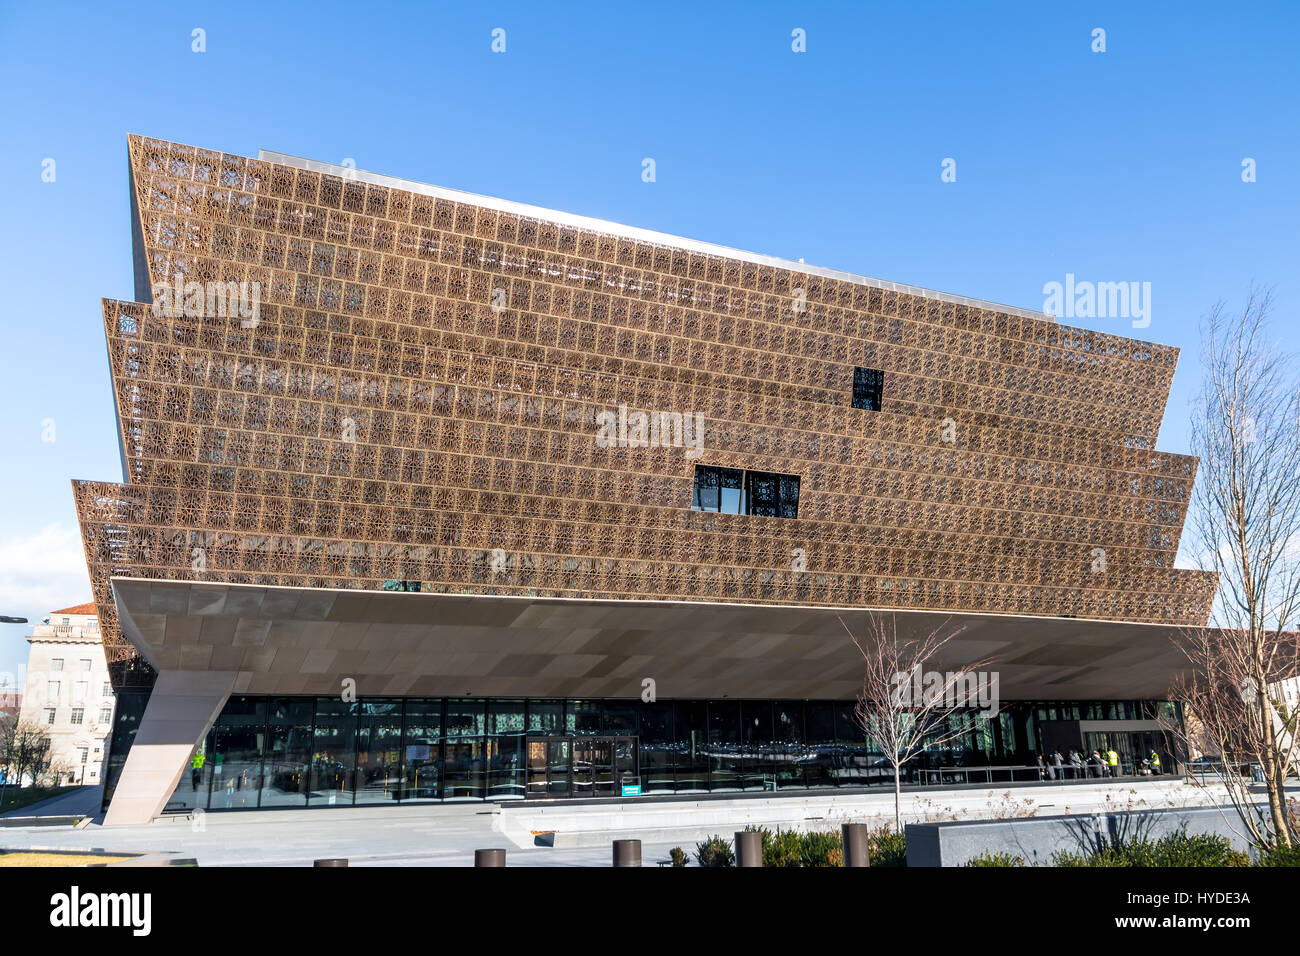 National Museum of African American History and Culture - Washington, D.C., USA Stockfoto